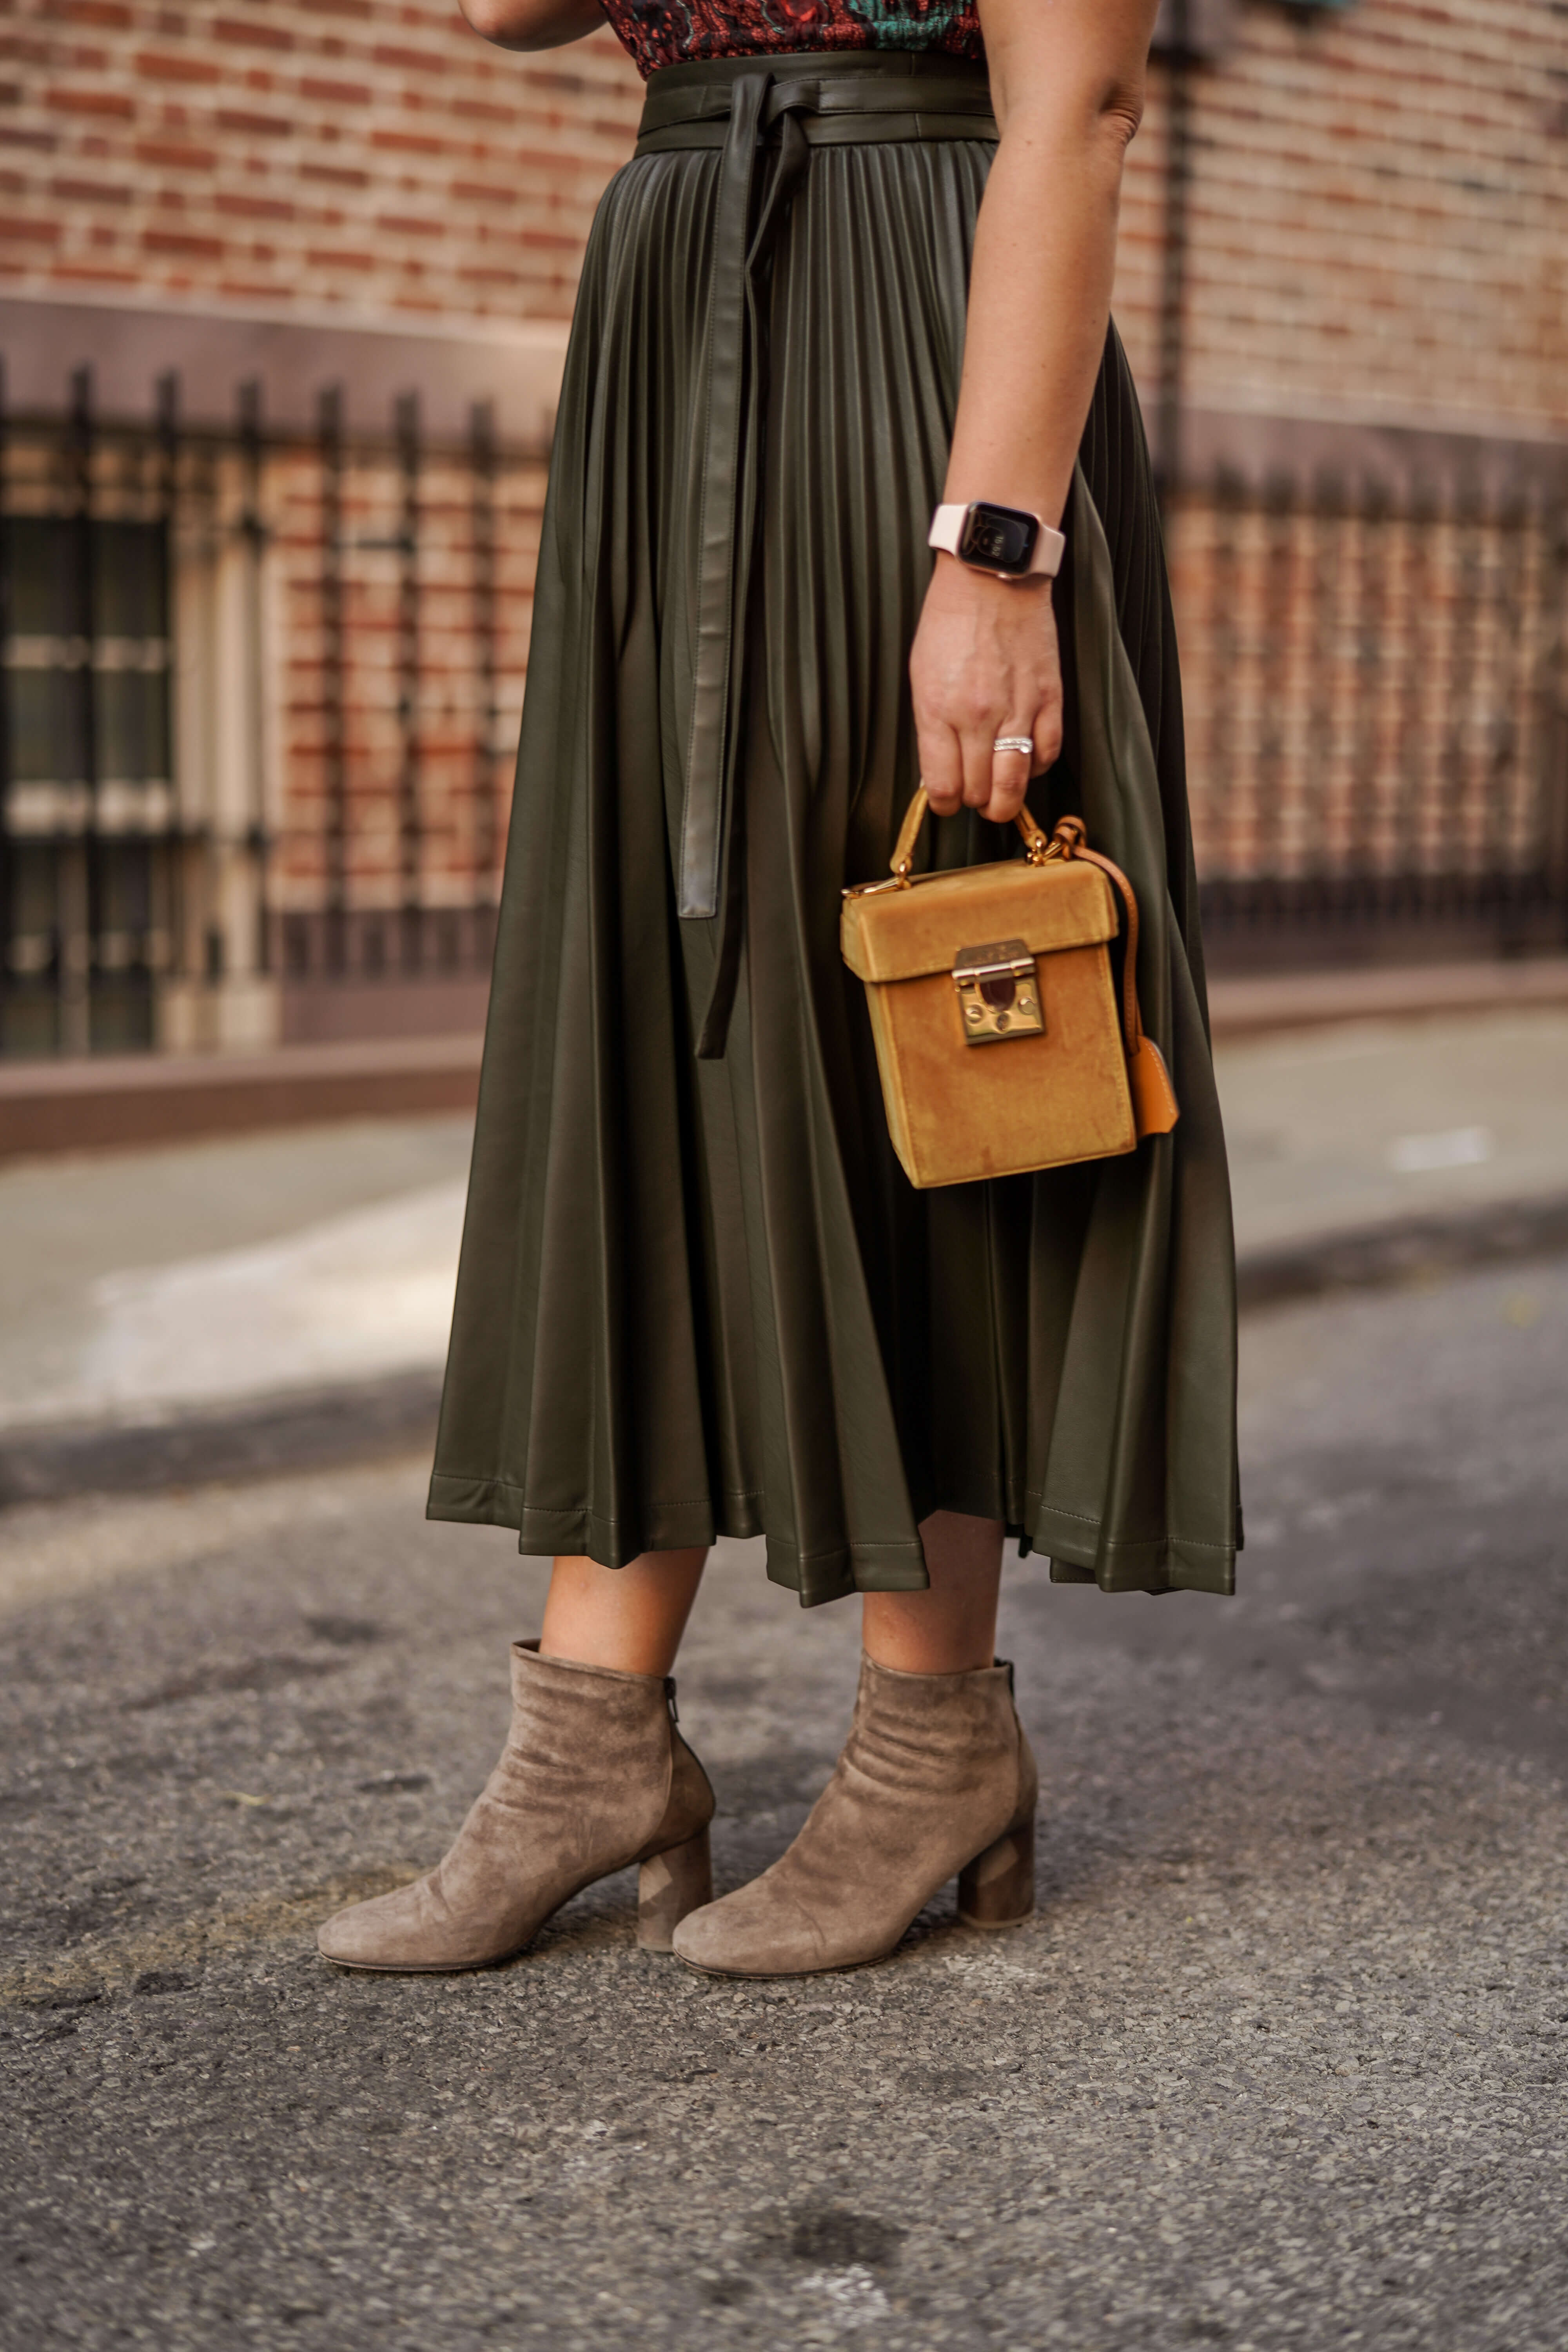 Phillip Lim Skirt Ulla Johnson Top Mark Cross Bag Coclico Booties Outfit by Modnitsa Styling